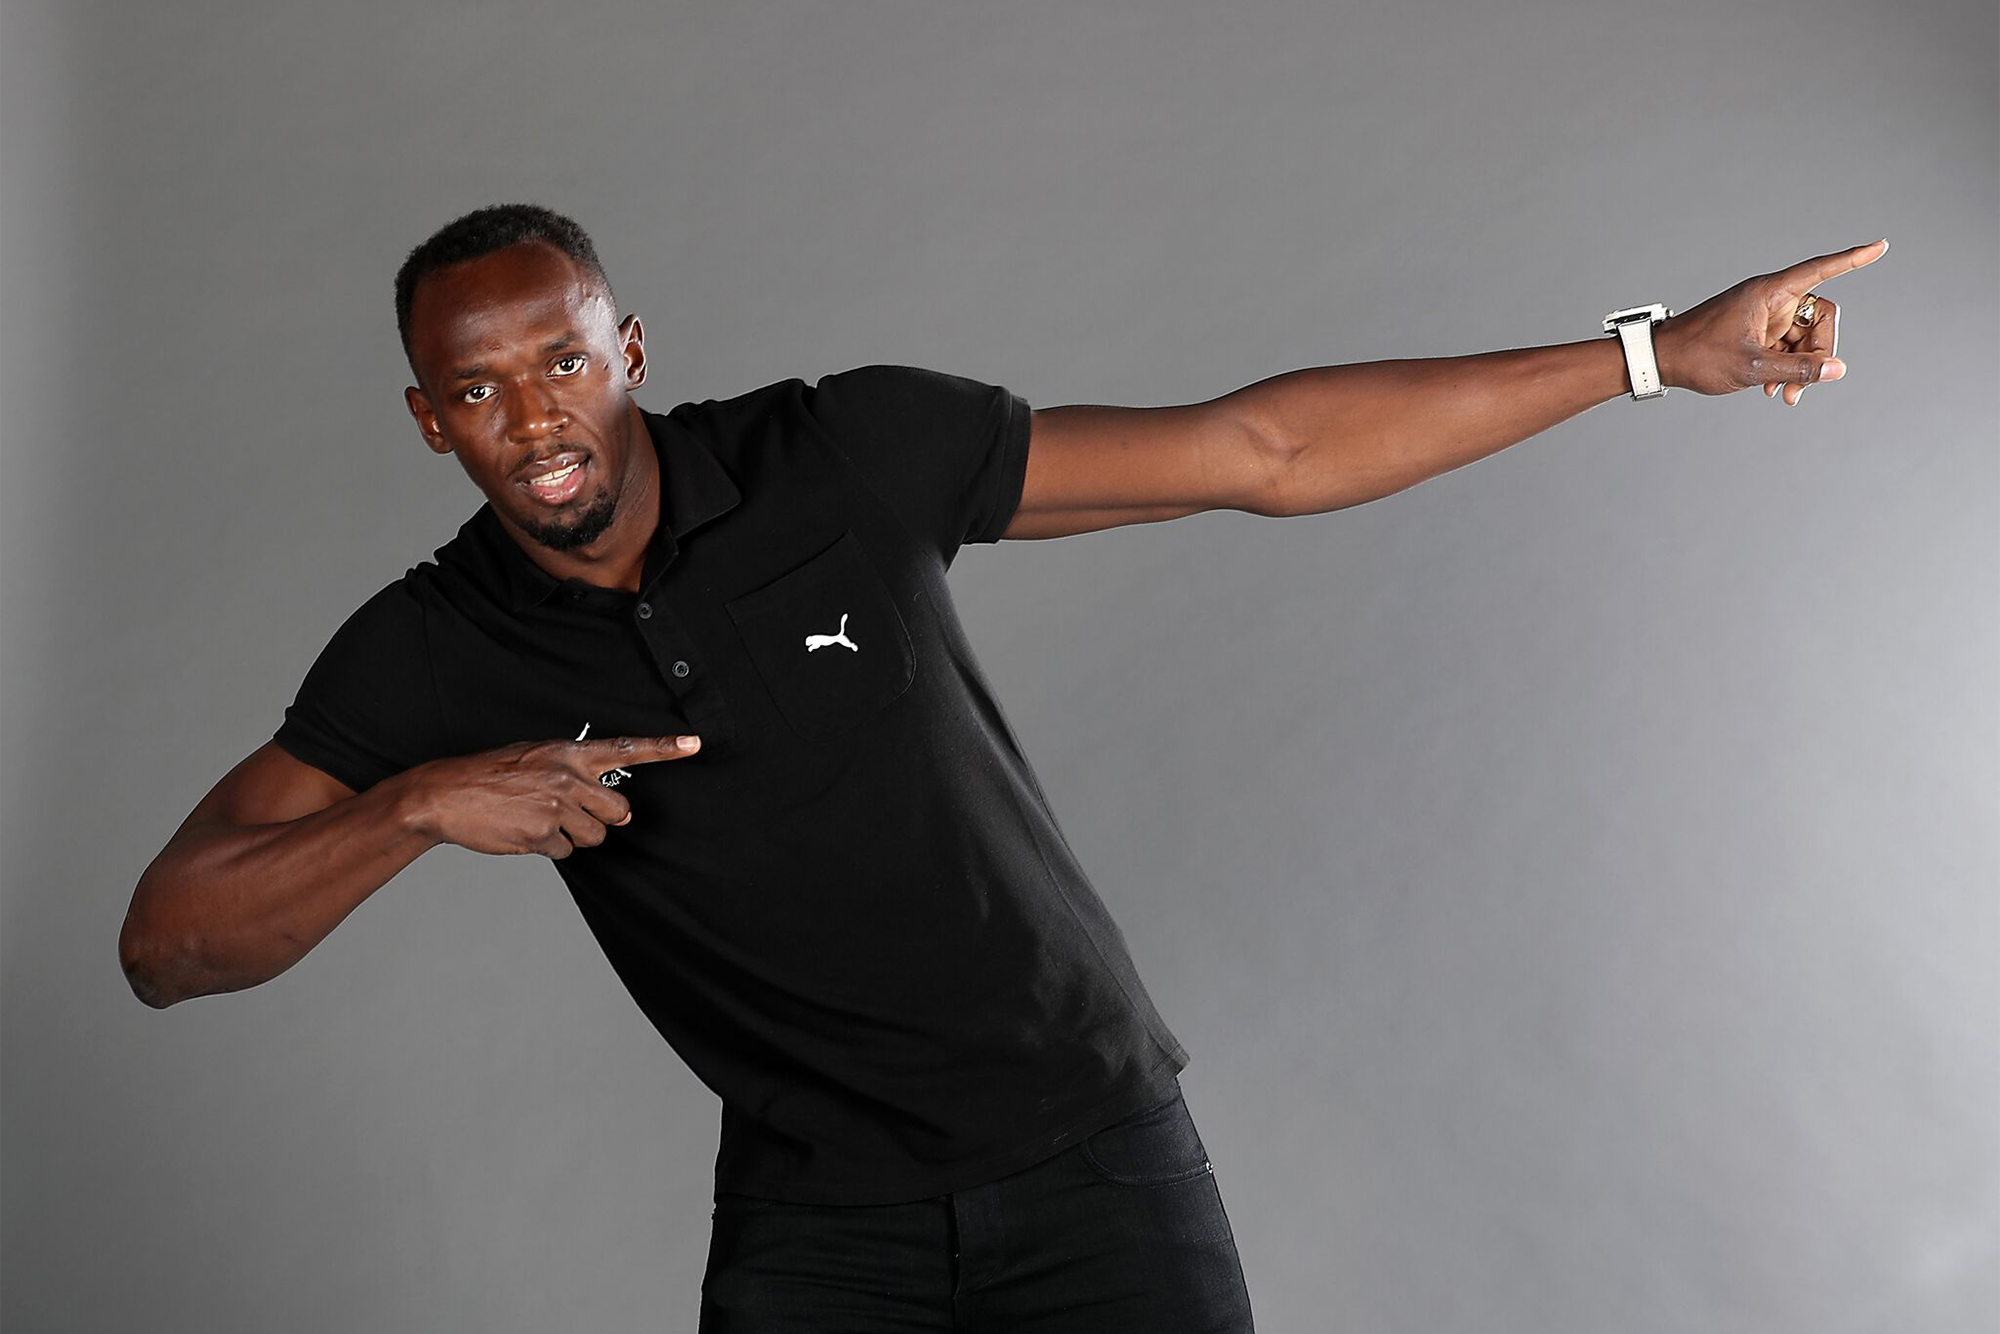 Usain Bolt files trademark application for his iconic victory pose